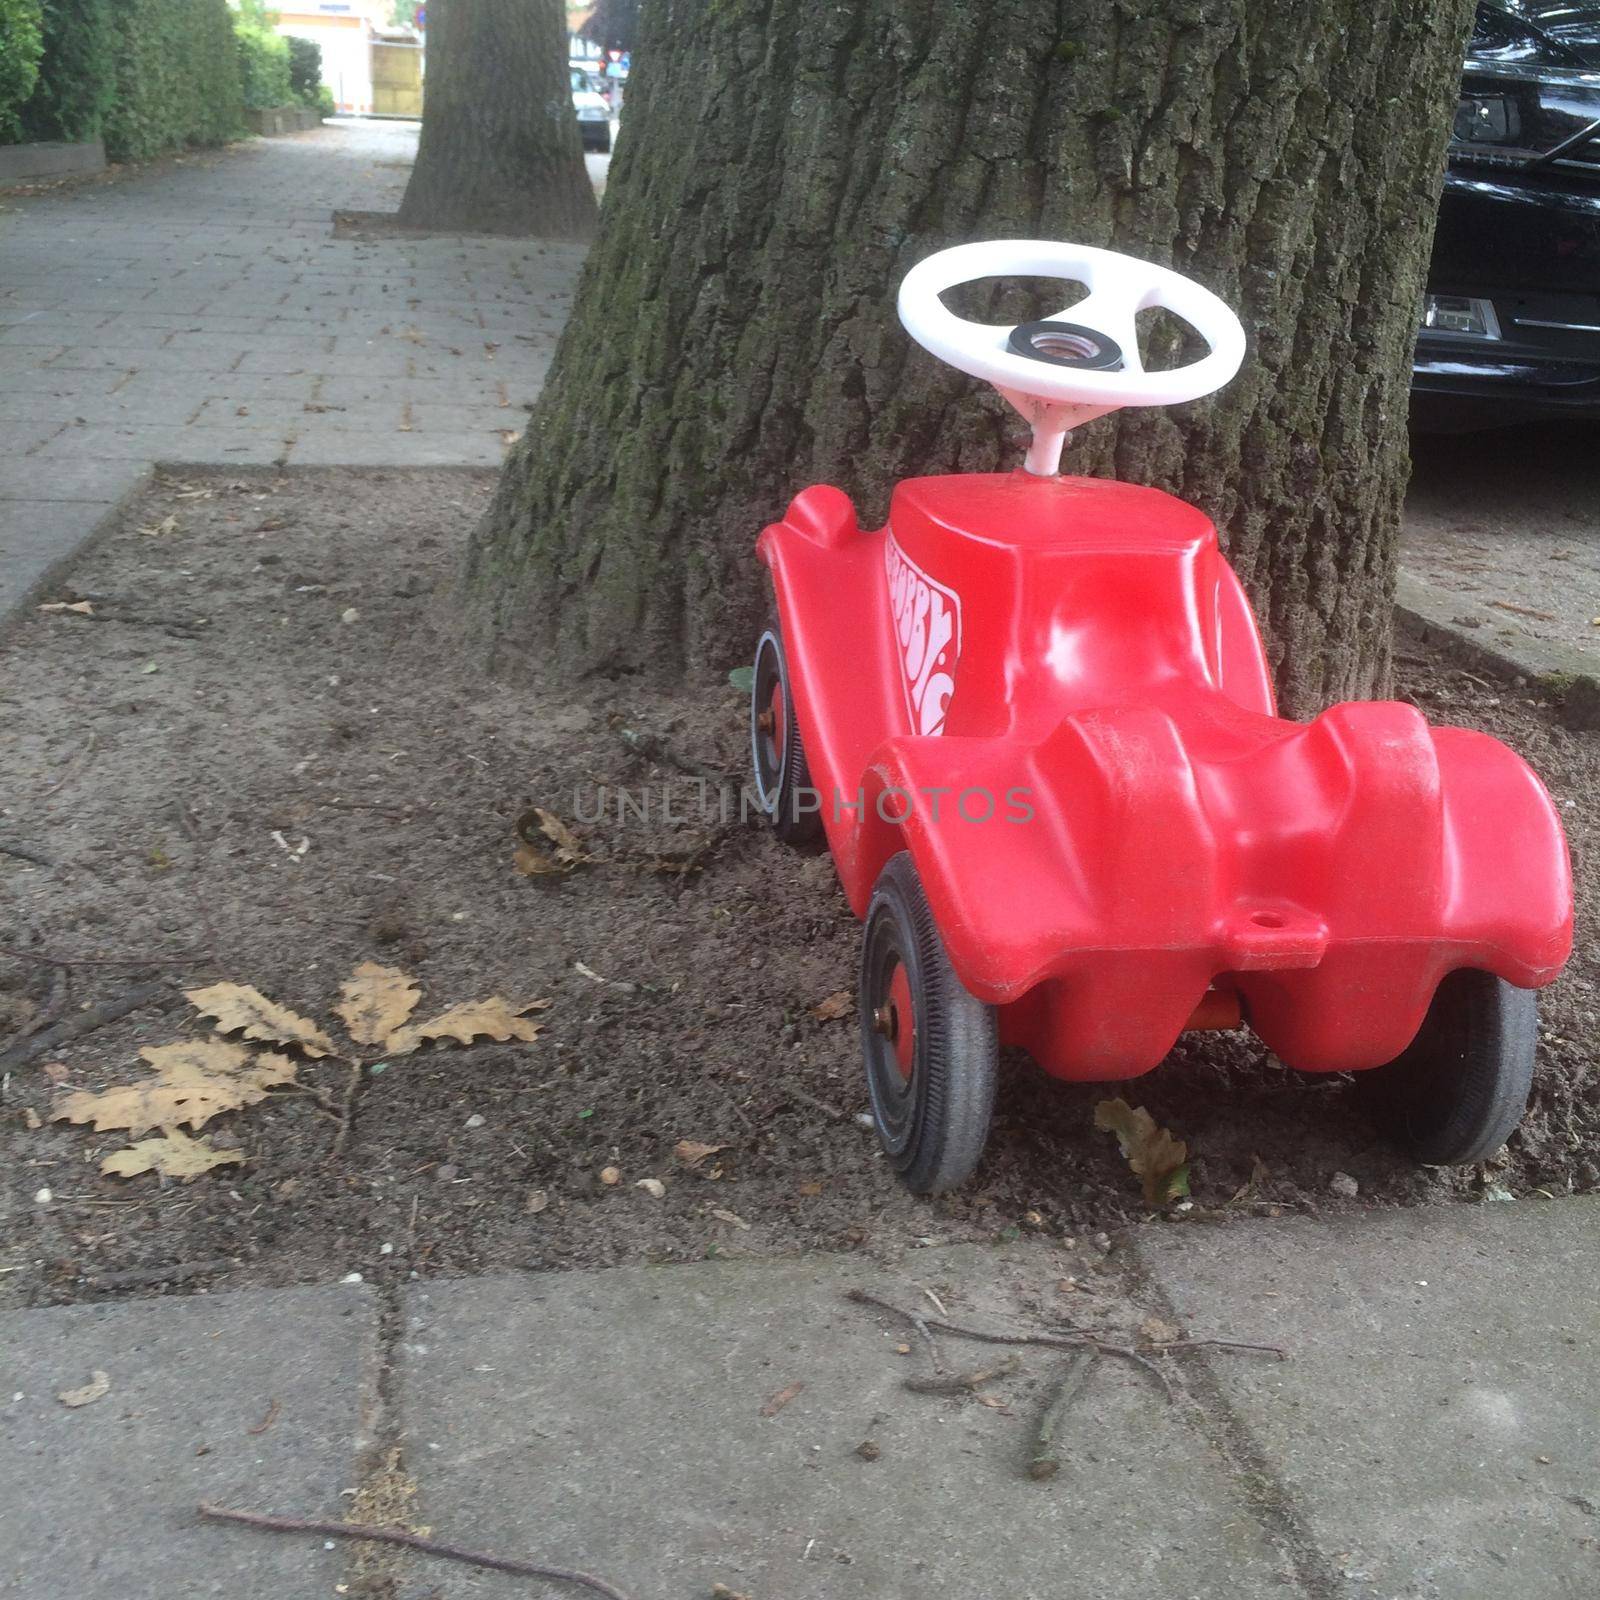 a Little red toy car parked against a tree in a street